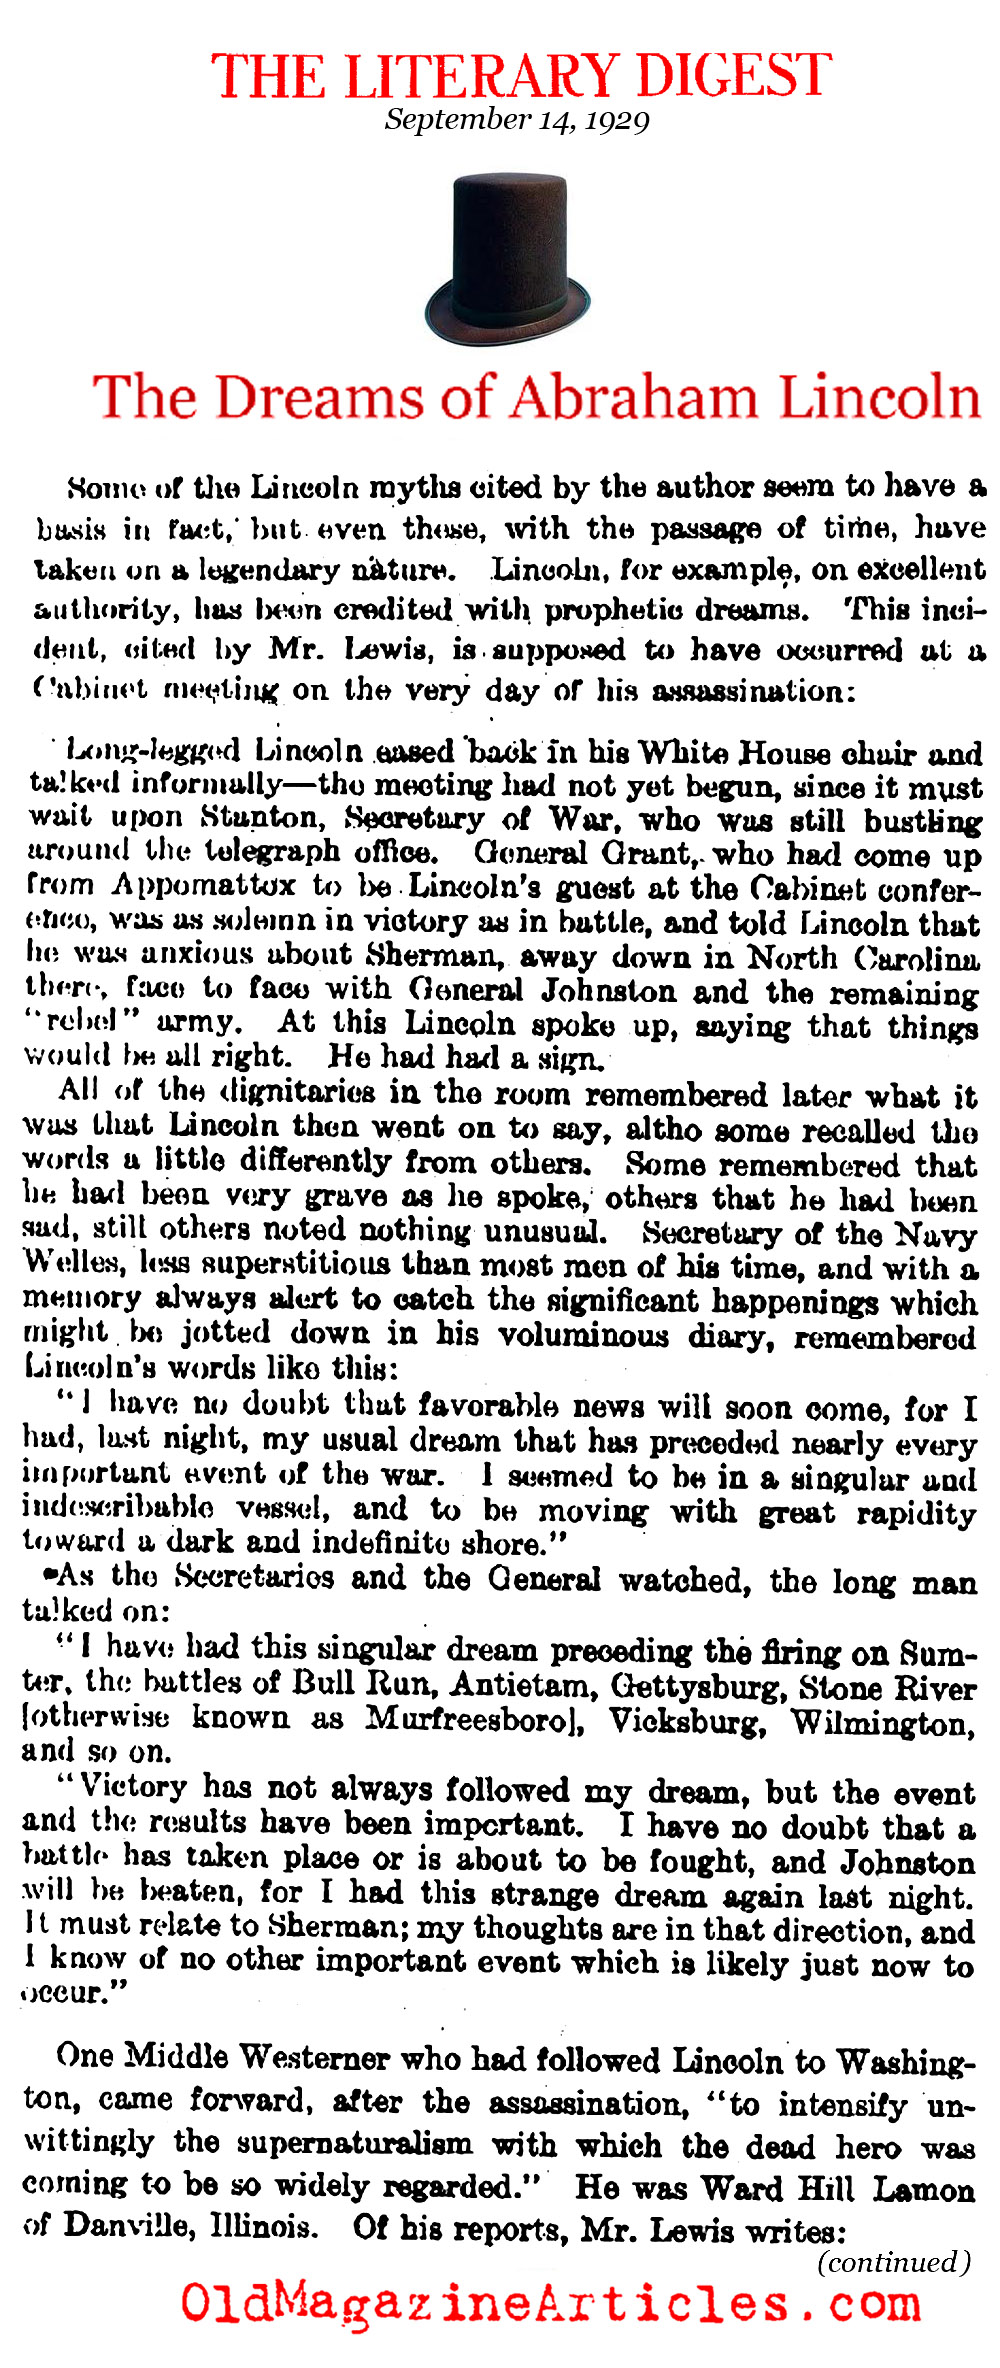 The Prophetic Dreams of Abraham Lincoln (Literary Digest, 1929)